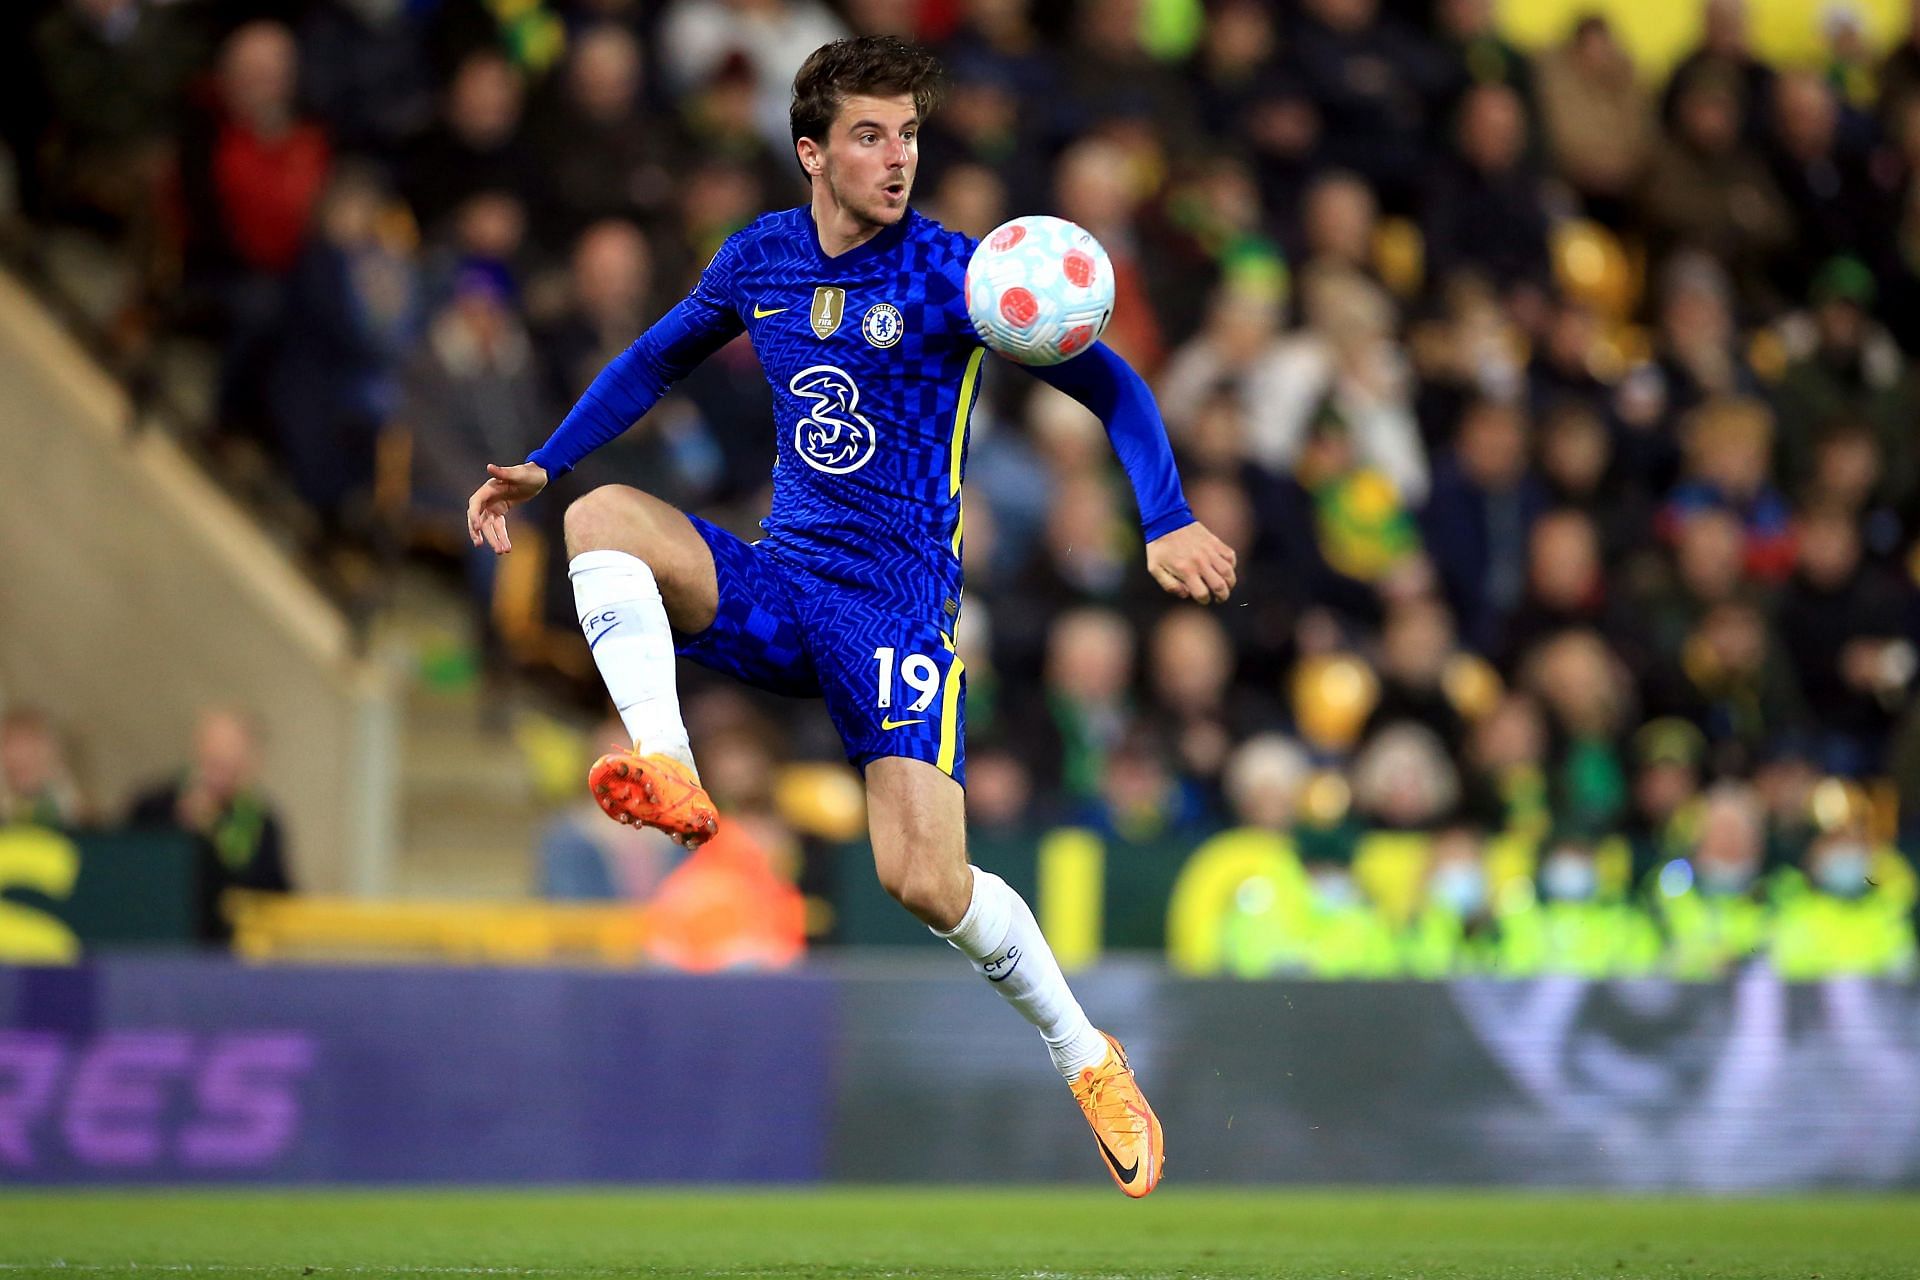 Among English players, Mason Mount has been one of the best